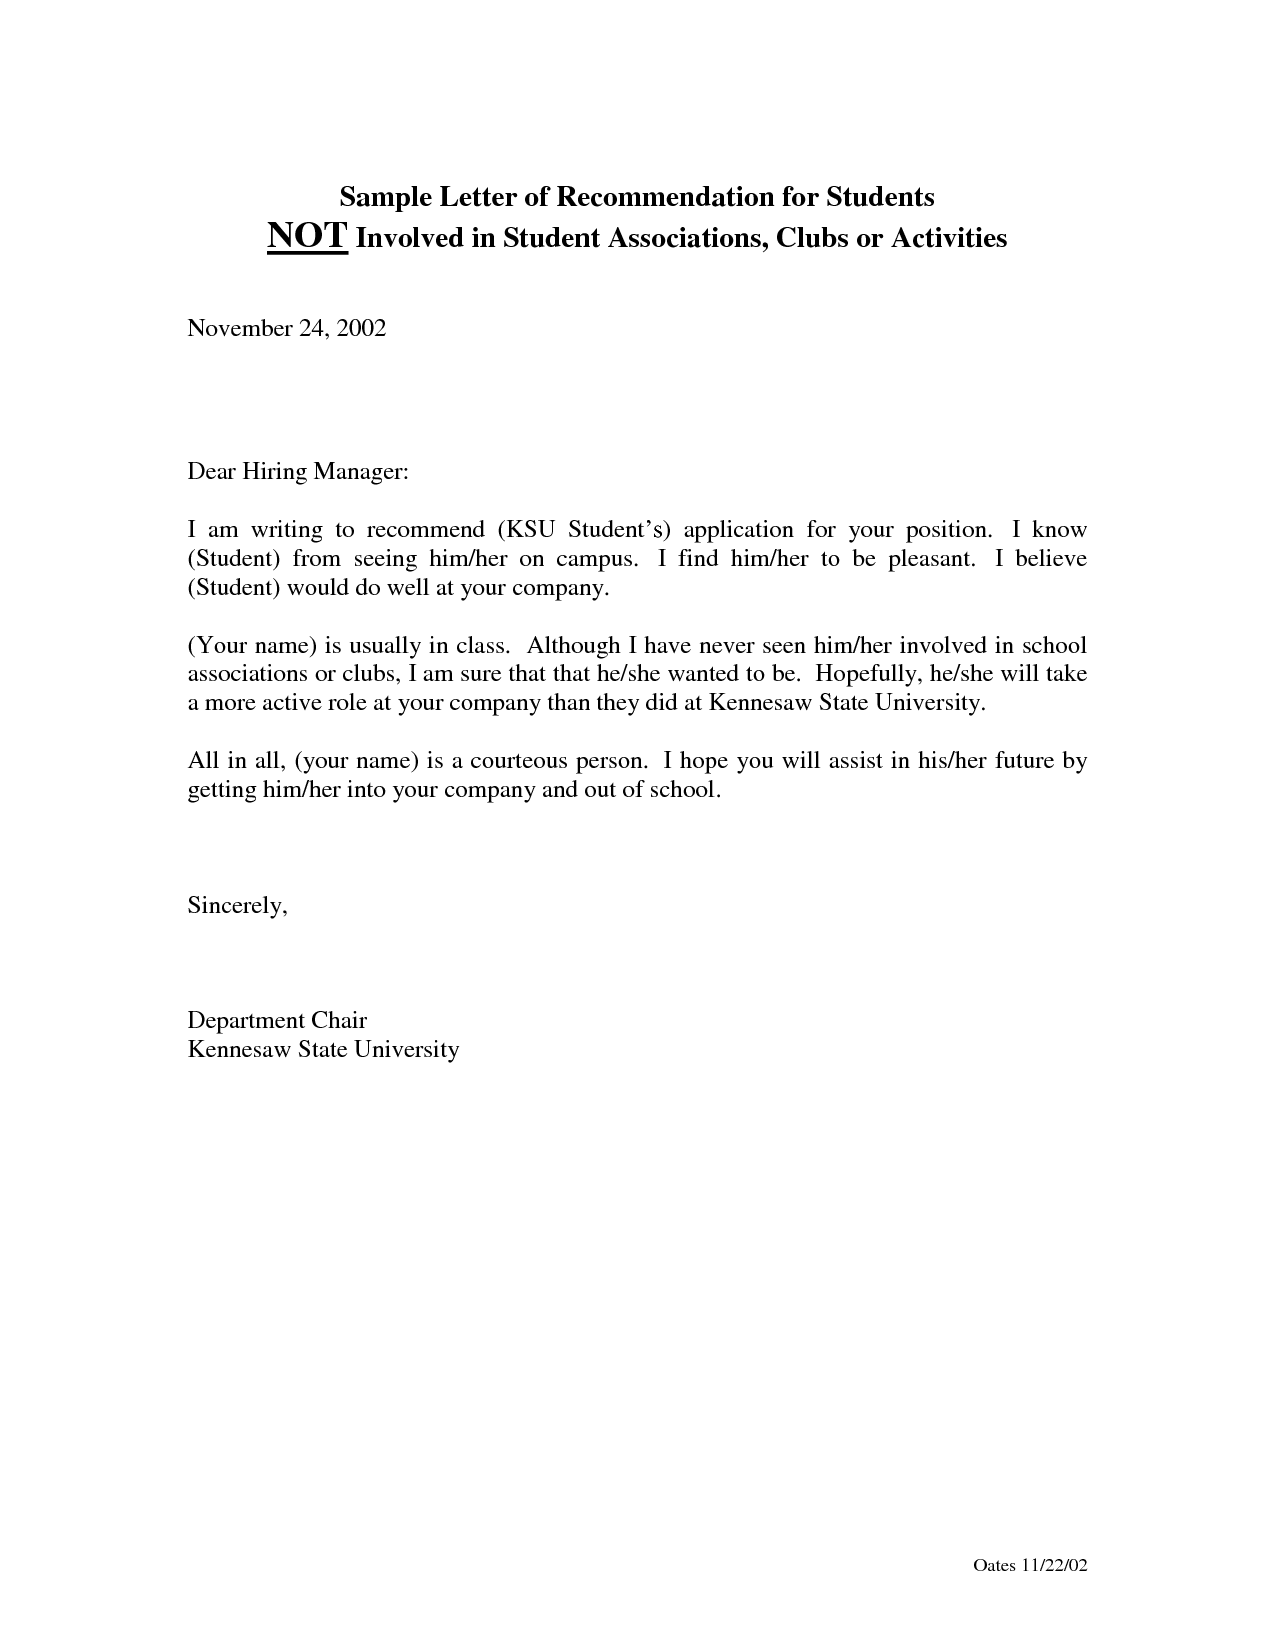 Sample Recommendation Letter For Student bbq grill recipes